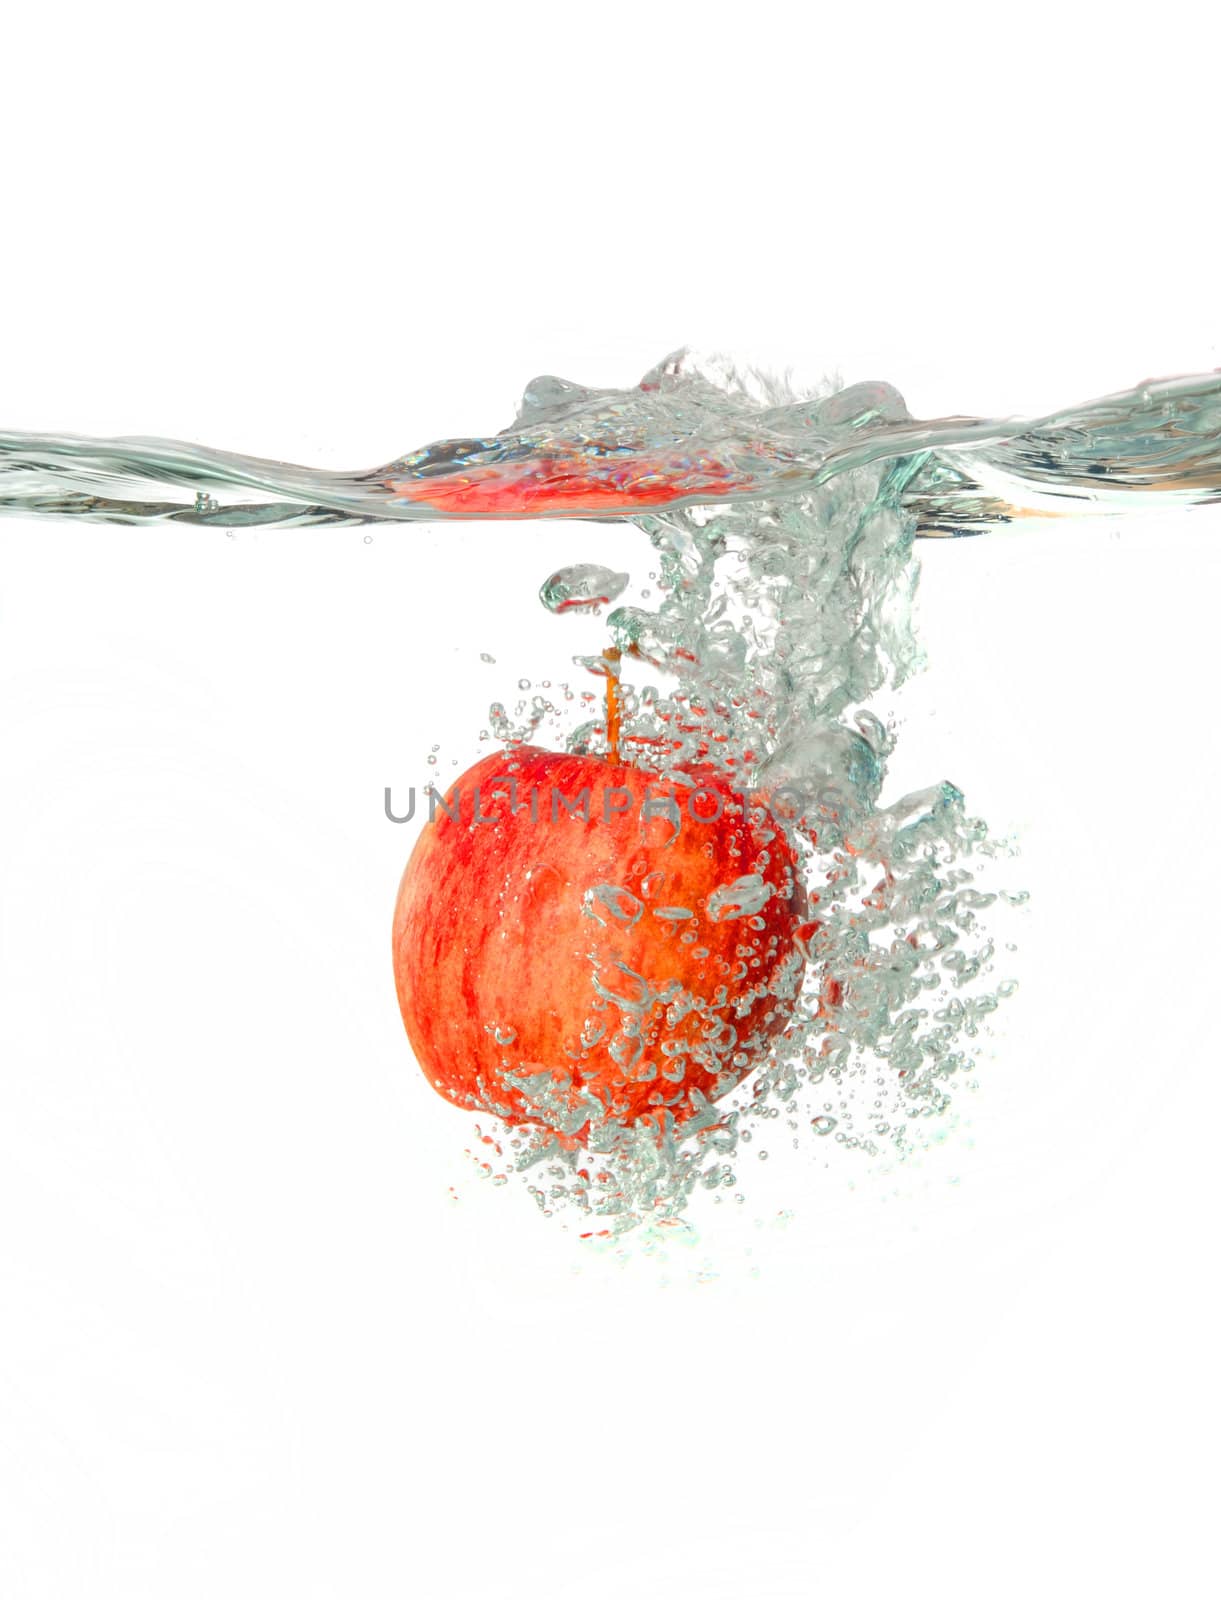 red apple Making a splash while falling into clear water